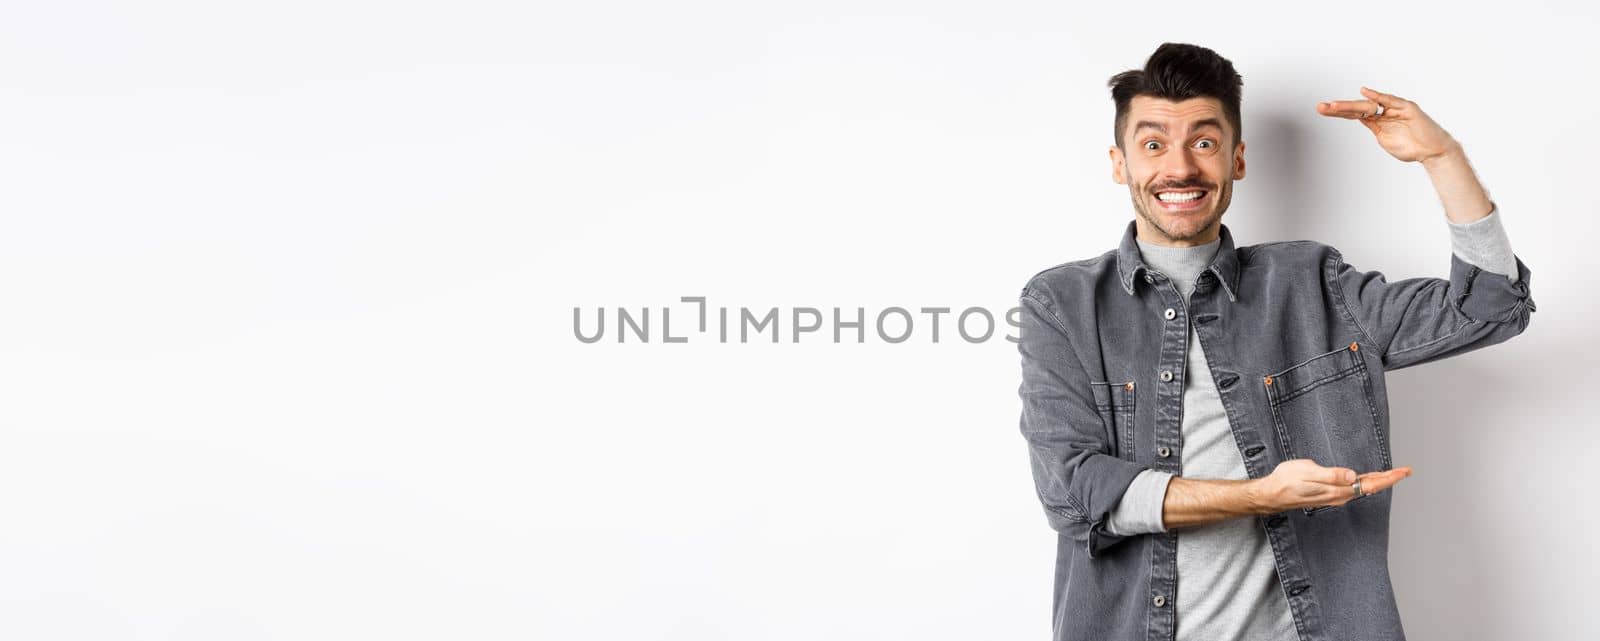 Cheerful guy smiling and showing big size, showing large thing and looking excited, standing against white background.